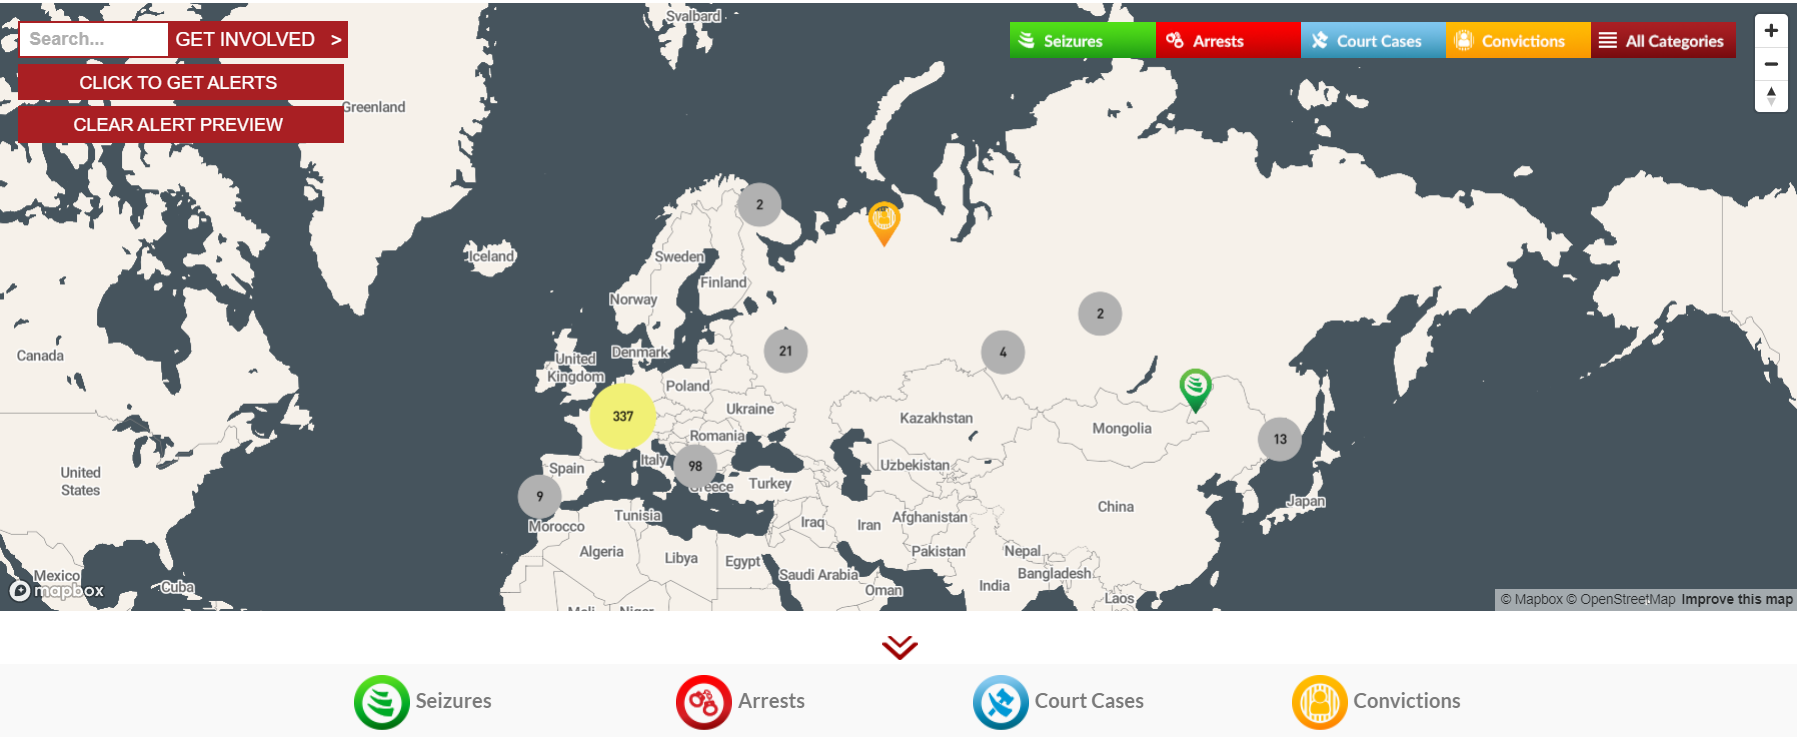 Screenshot from the #WildEye dashboard, showing a map of Europe and Asia with small data points